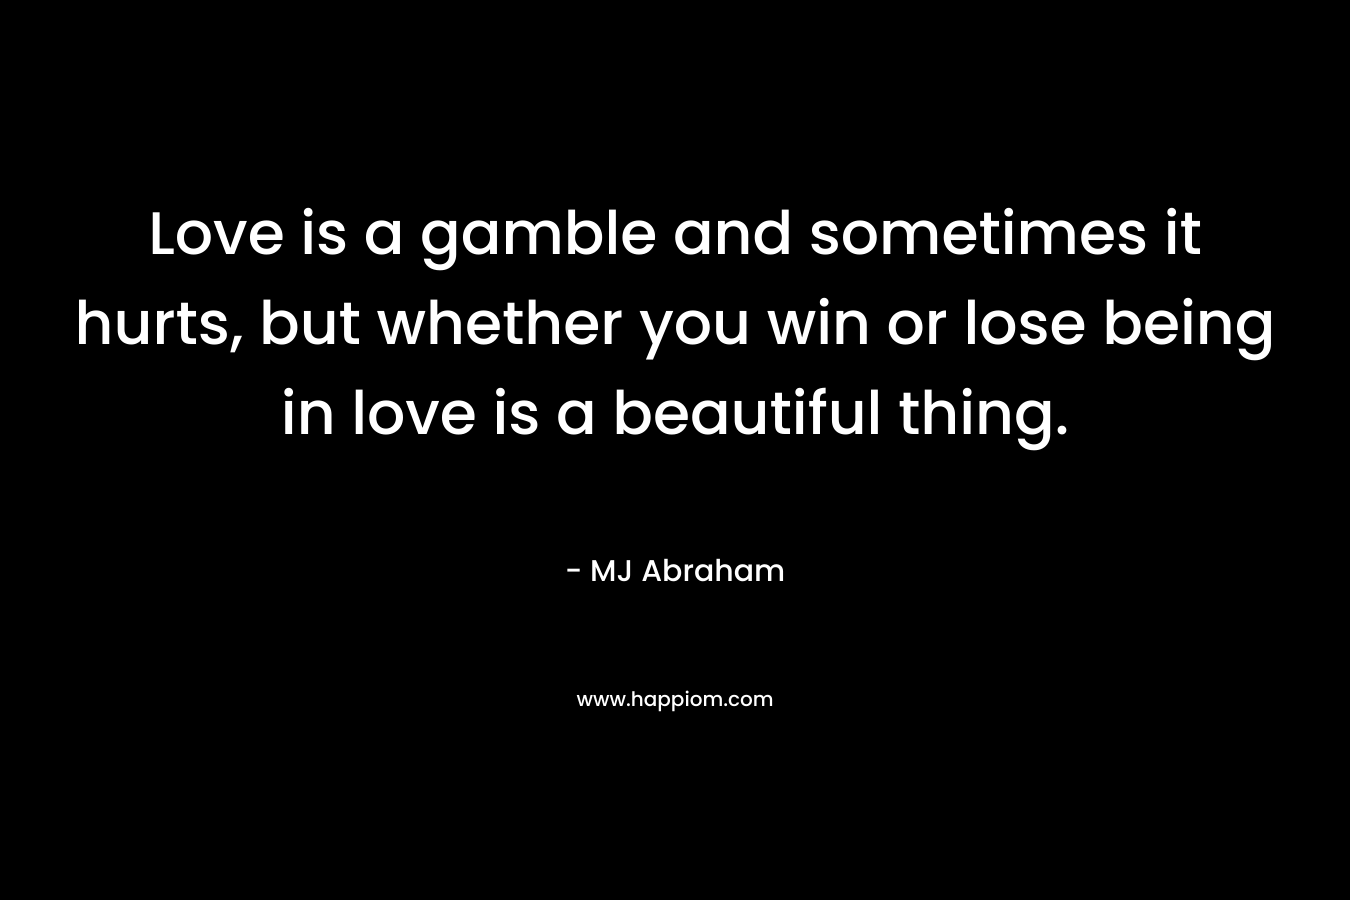 Love is a gamble and sometimes it hurts, but whether you win or lose being in love is a beautiful thing. – MJ Abraham